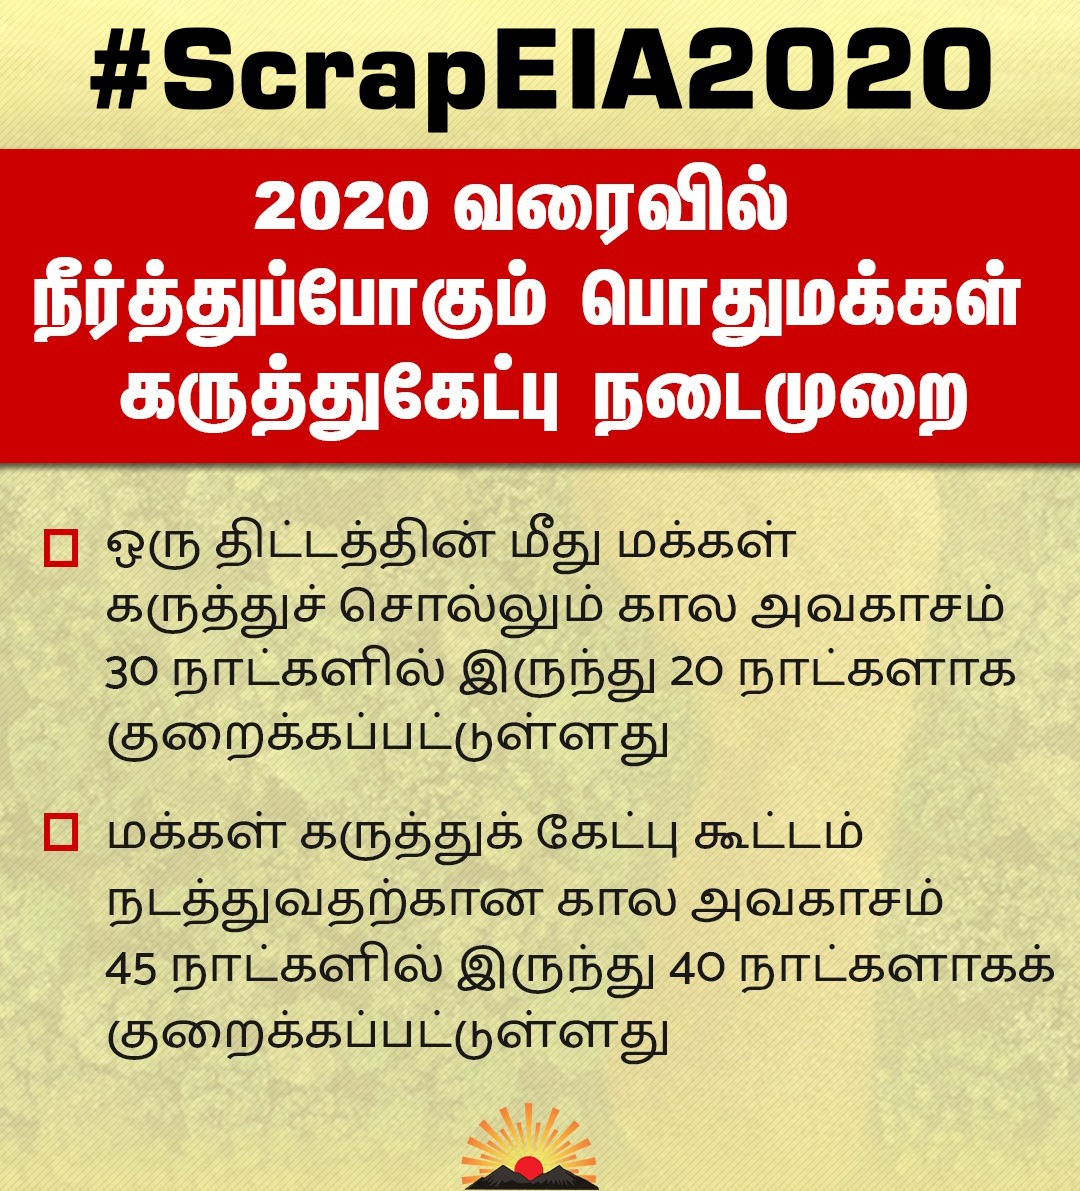 The Union government argues that the new draft will reinforce transparency. However, the draft reduces the space available for public participation, thereby abandoning public trust which is a clear contradiction to the assurance of the Govt. #ScrapEIA2020